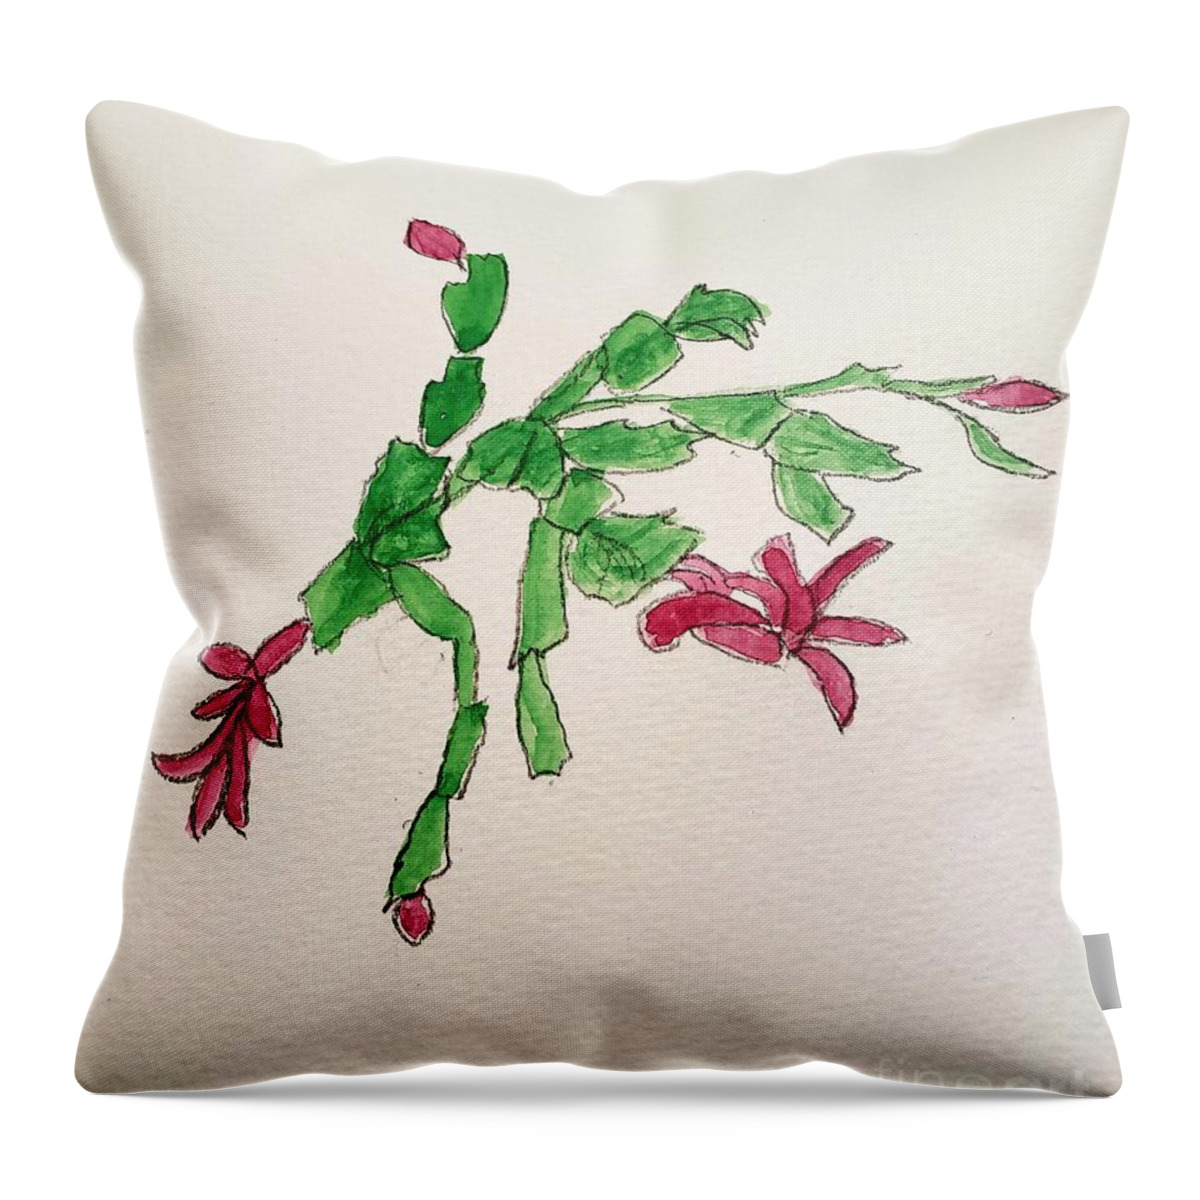 Overcoming Obstacles Throw Pillow featuring the painting Flowering Cactus by Margaret Welsh Willowsilk